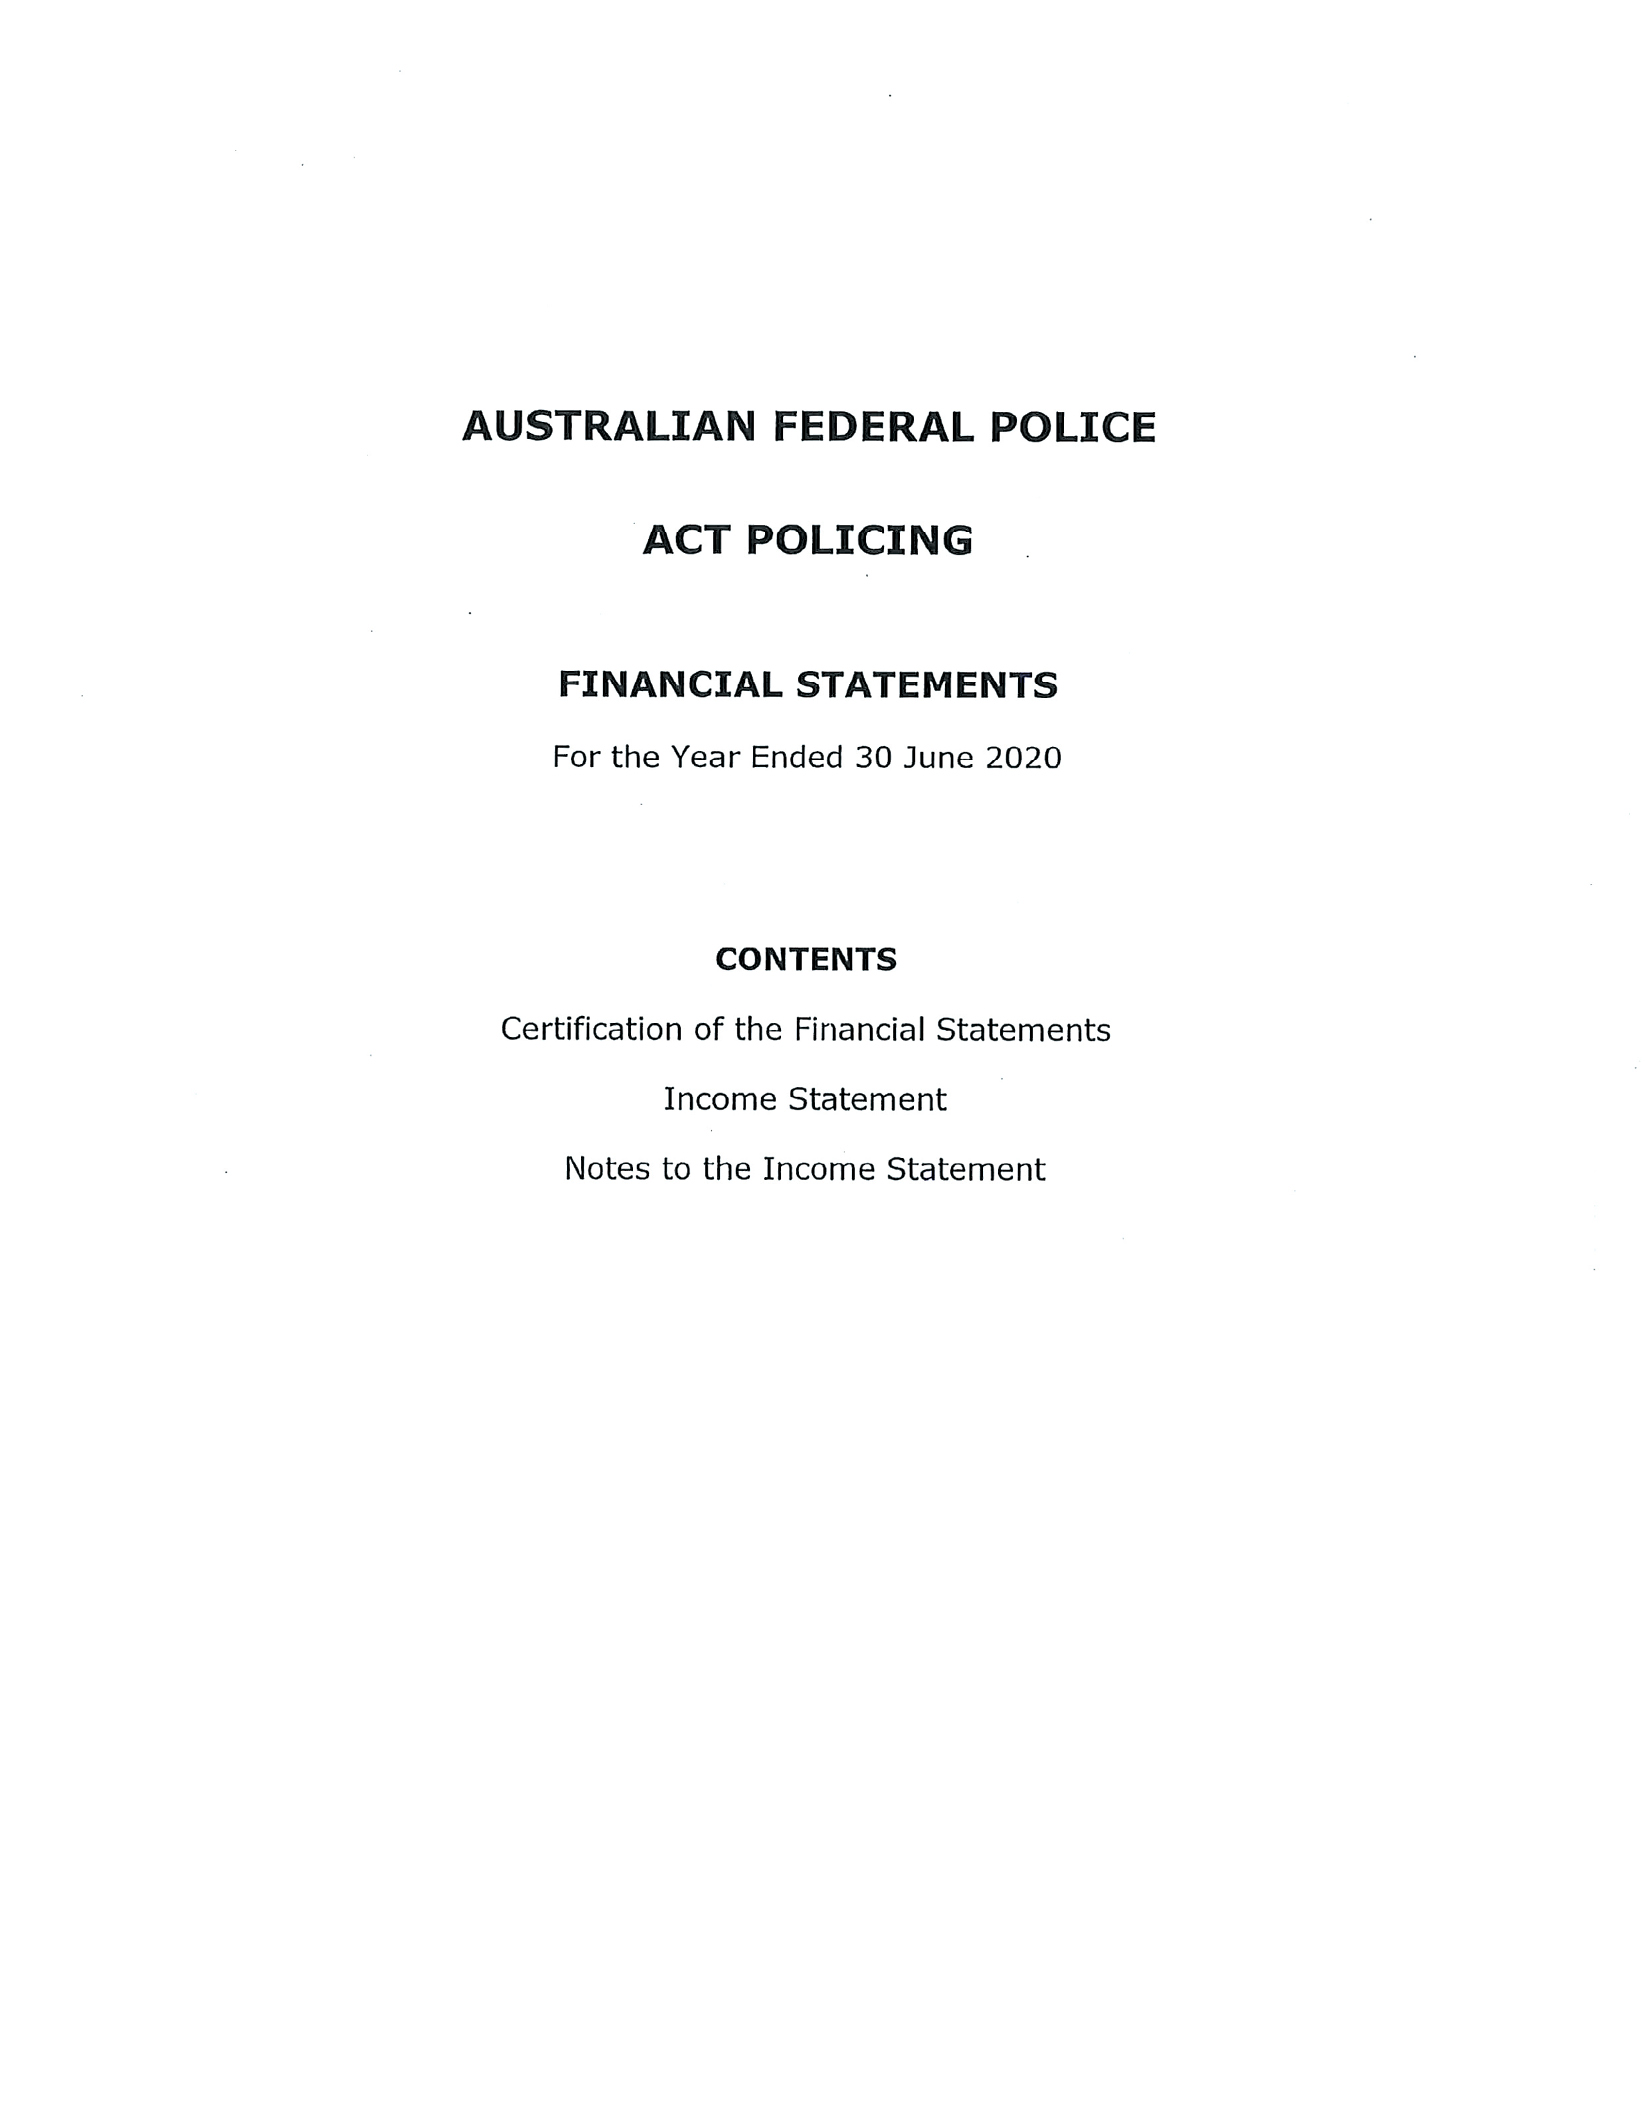 These images are ACT Policing’s Financial Statements. 